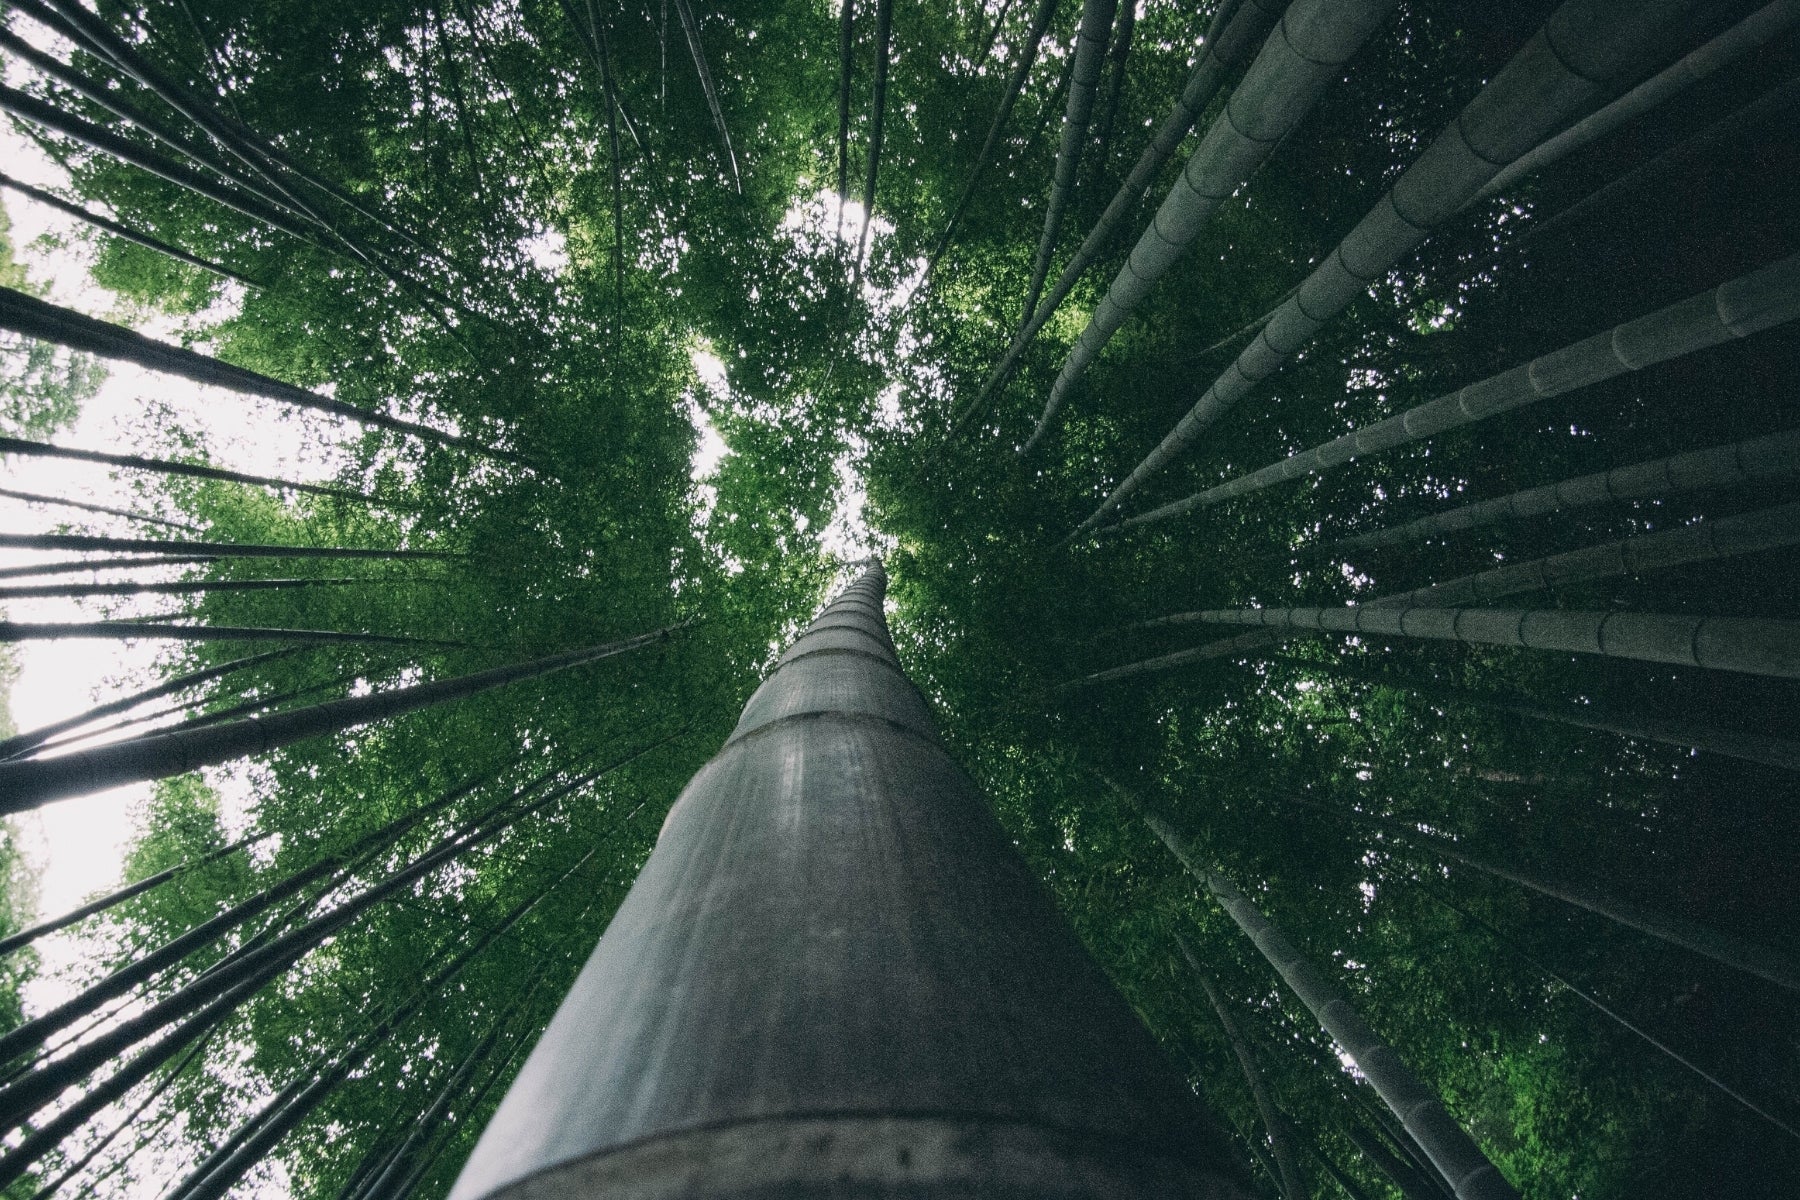 What is Bamboo Used for?